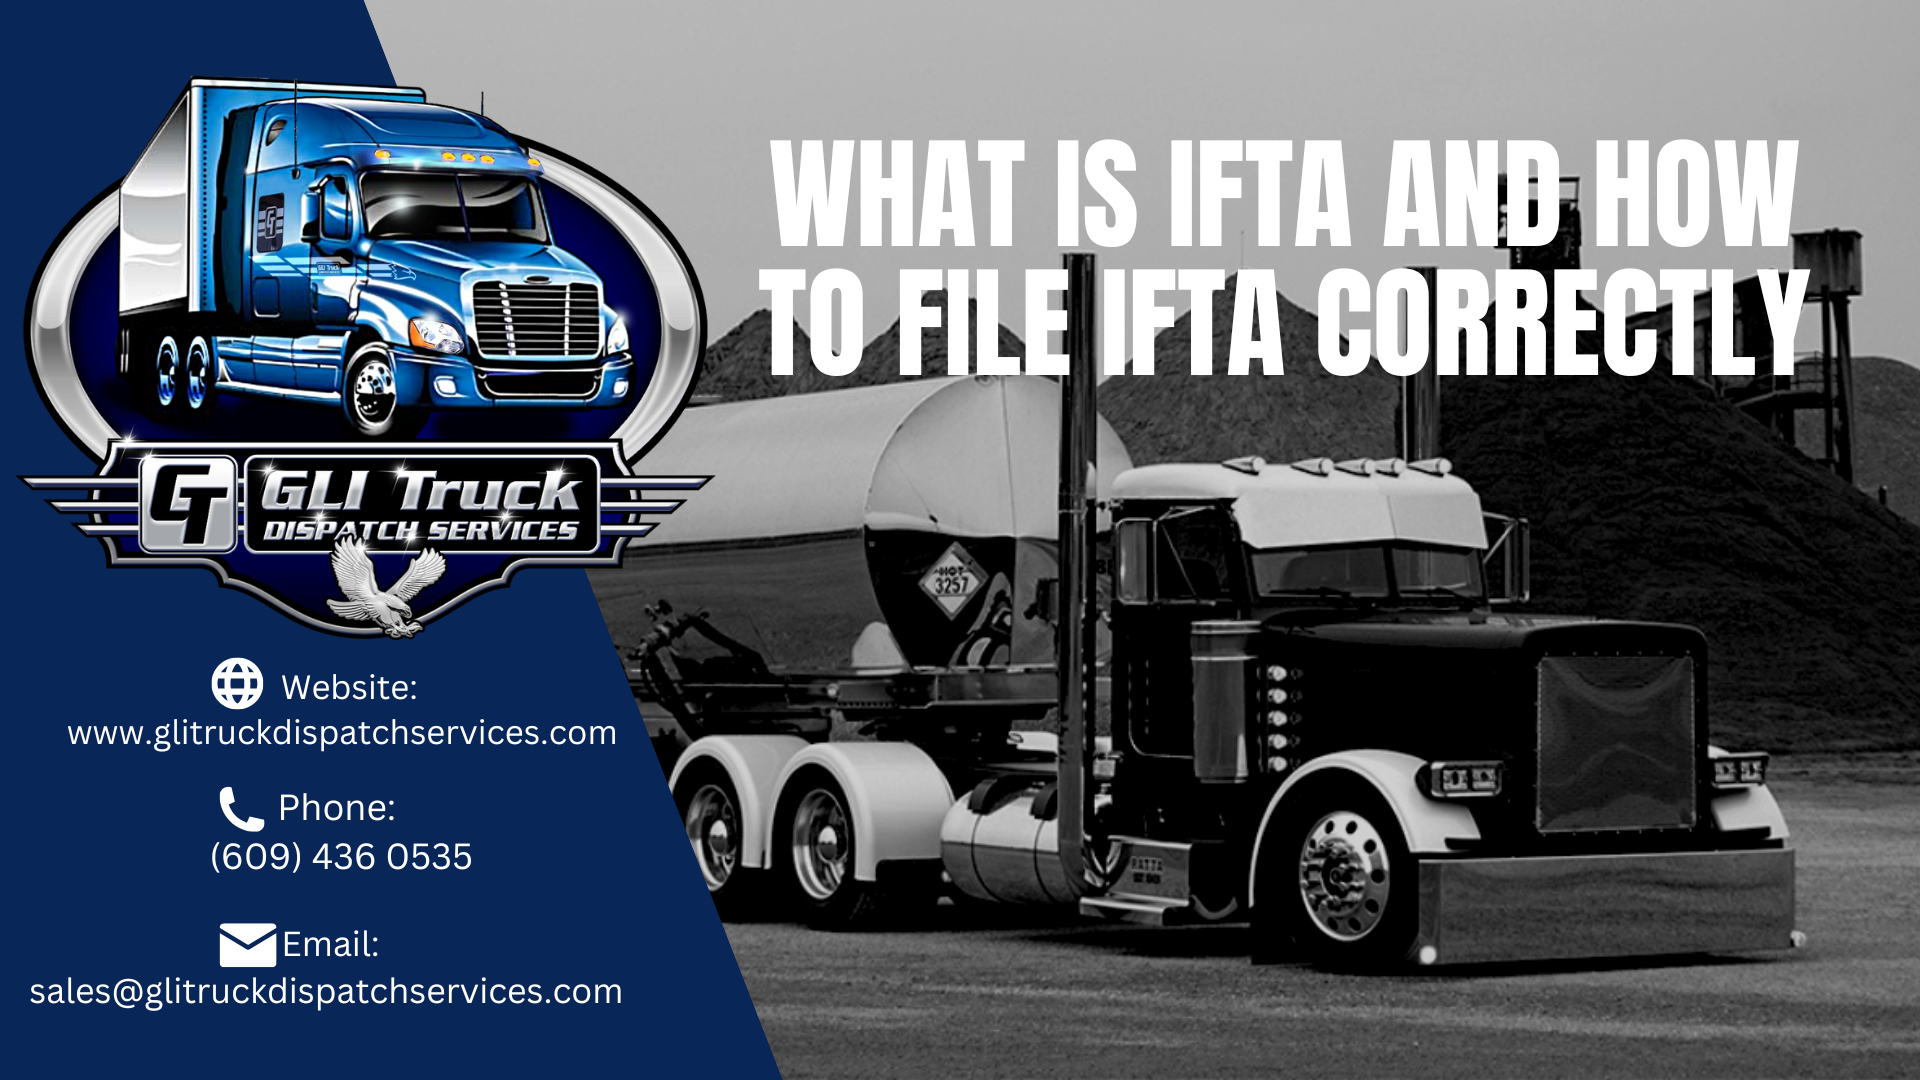 What is IFTA and how to file IFTA correctly